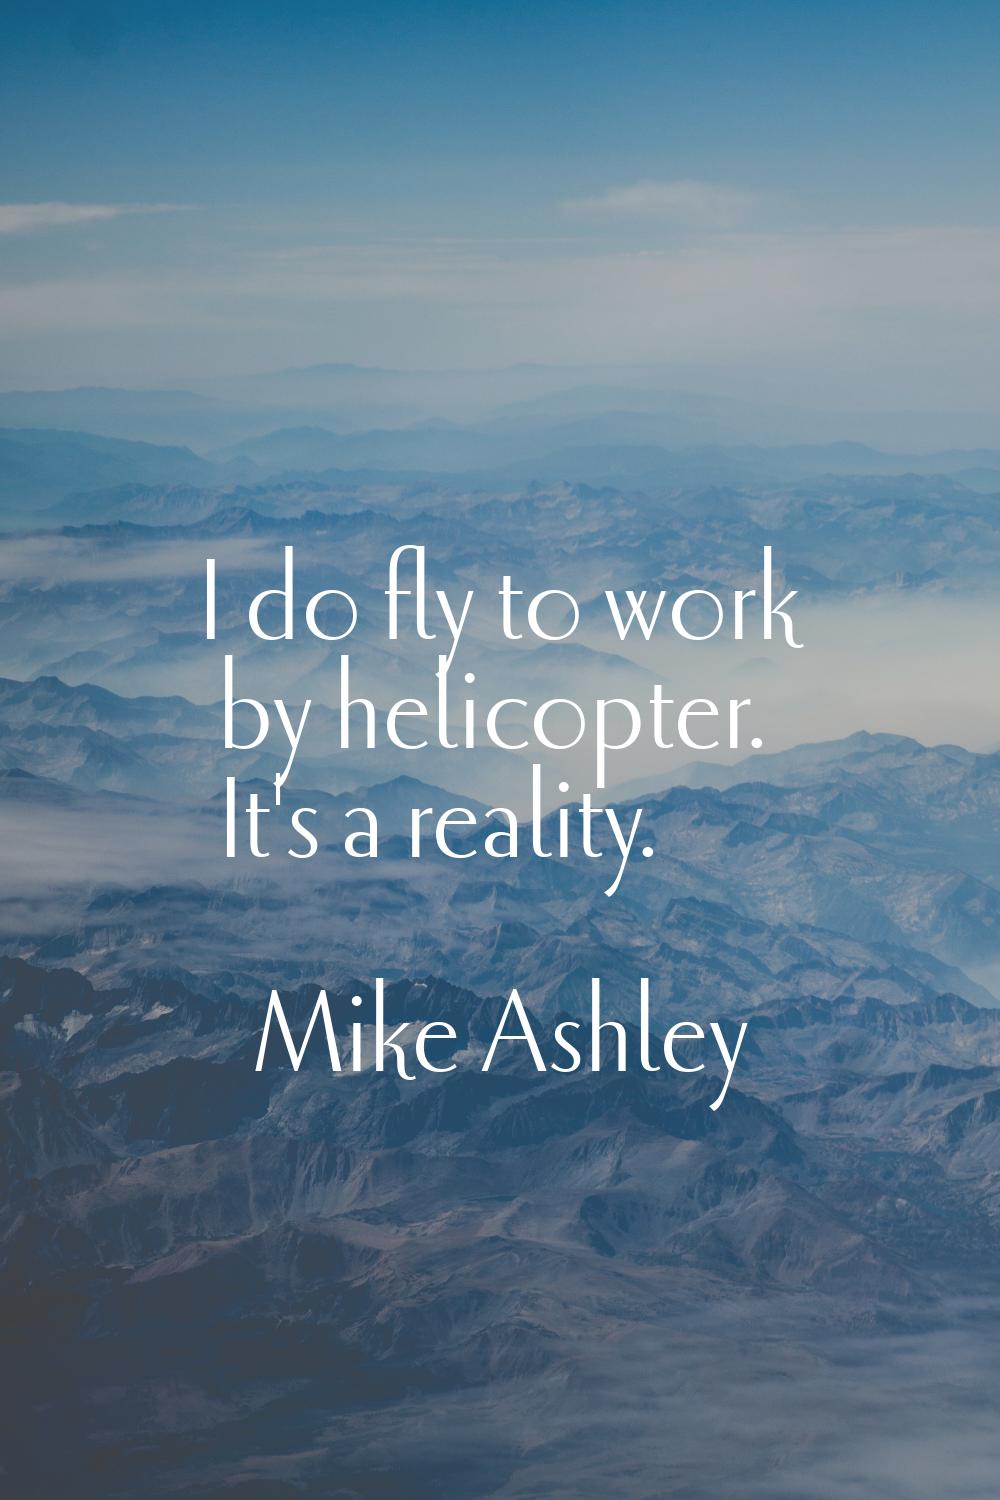 I do fly to work by helicopter. It's a reality.